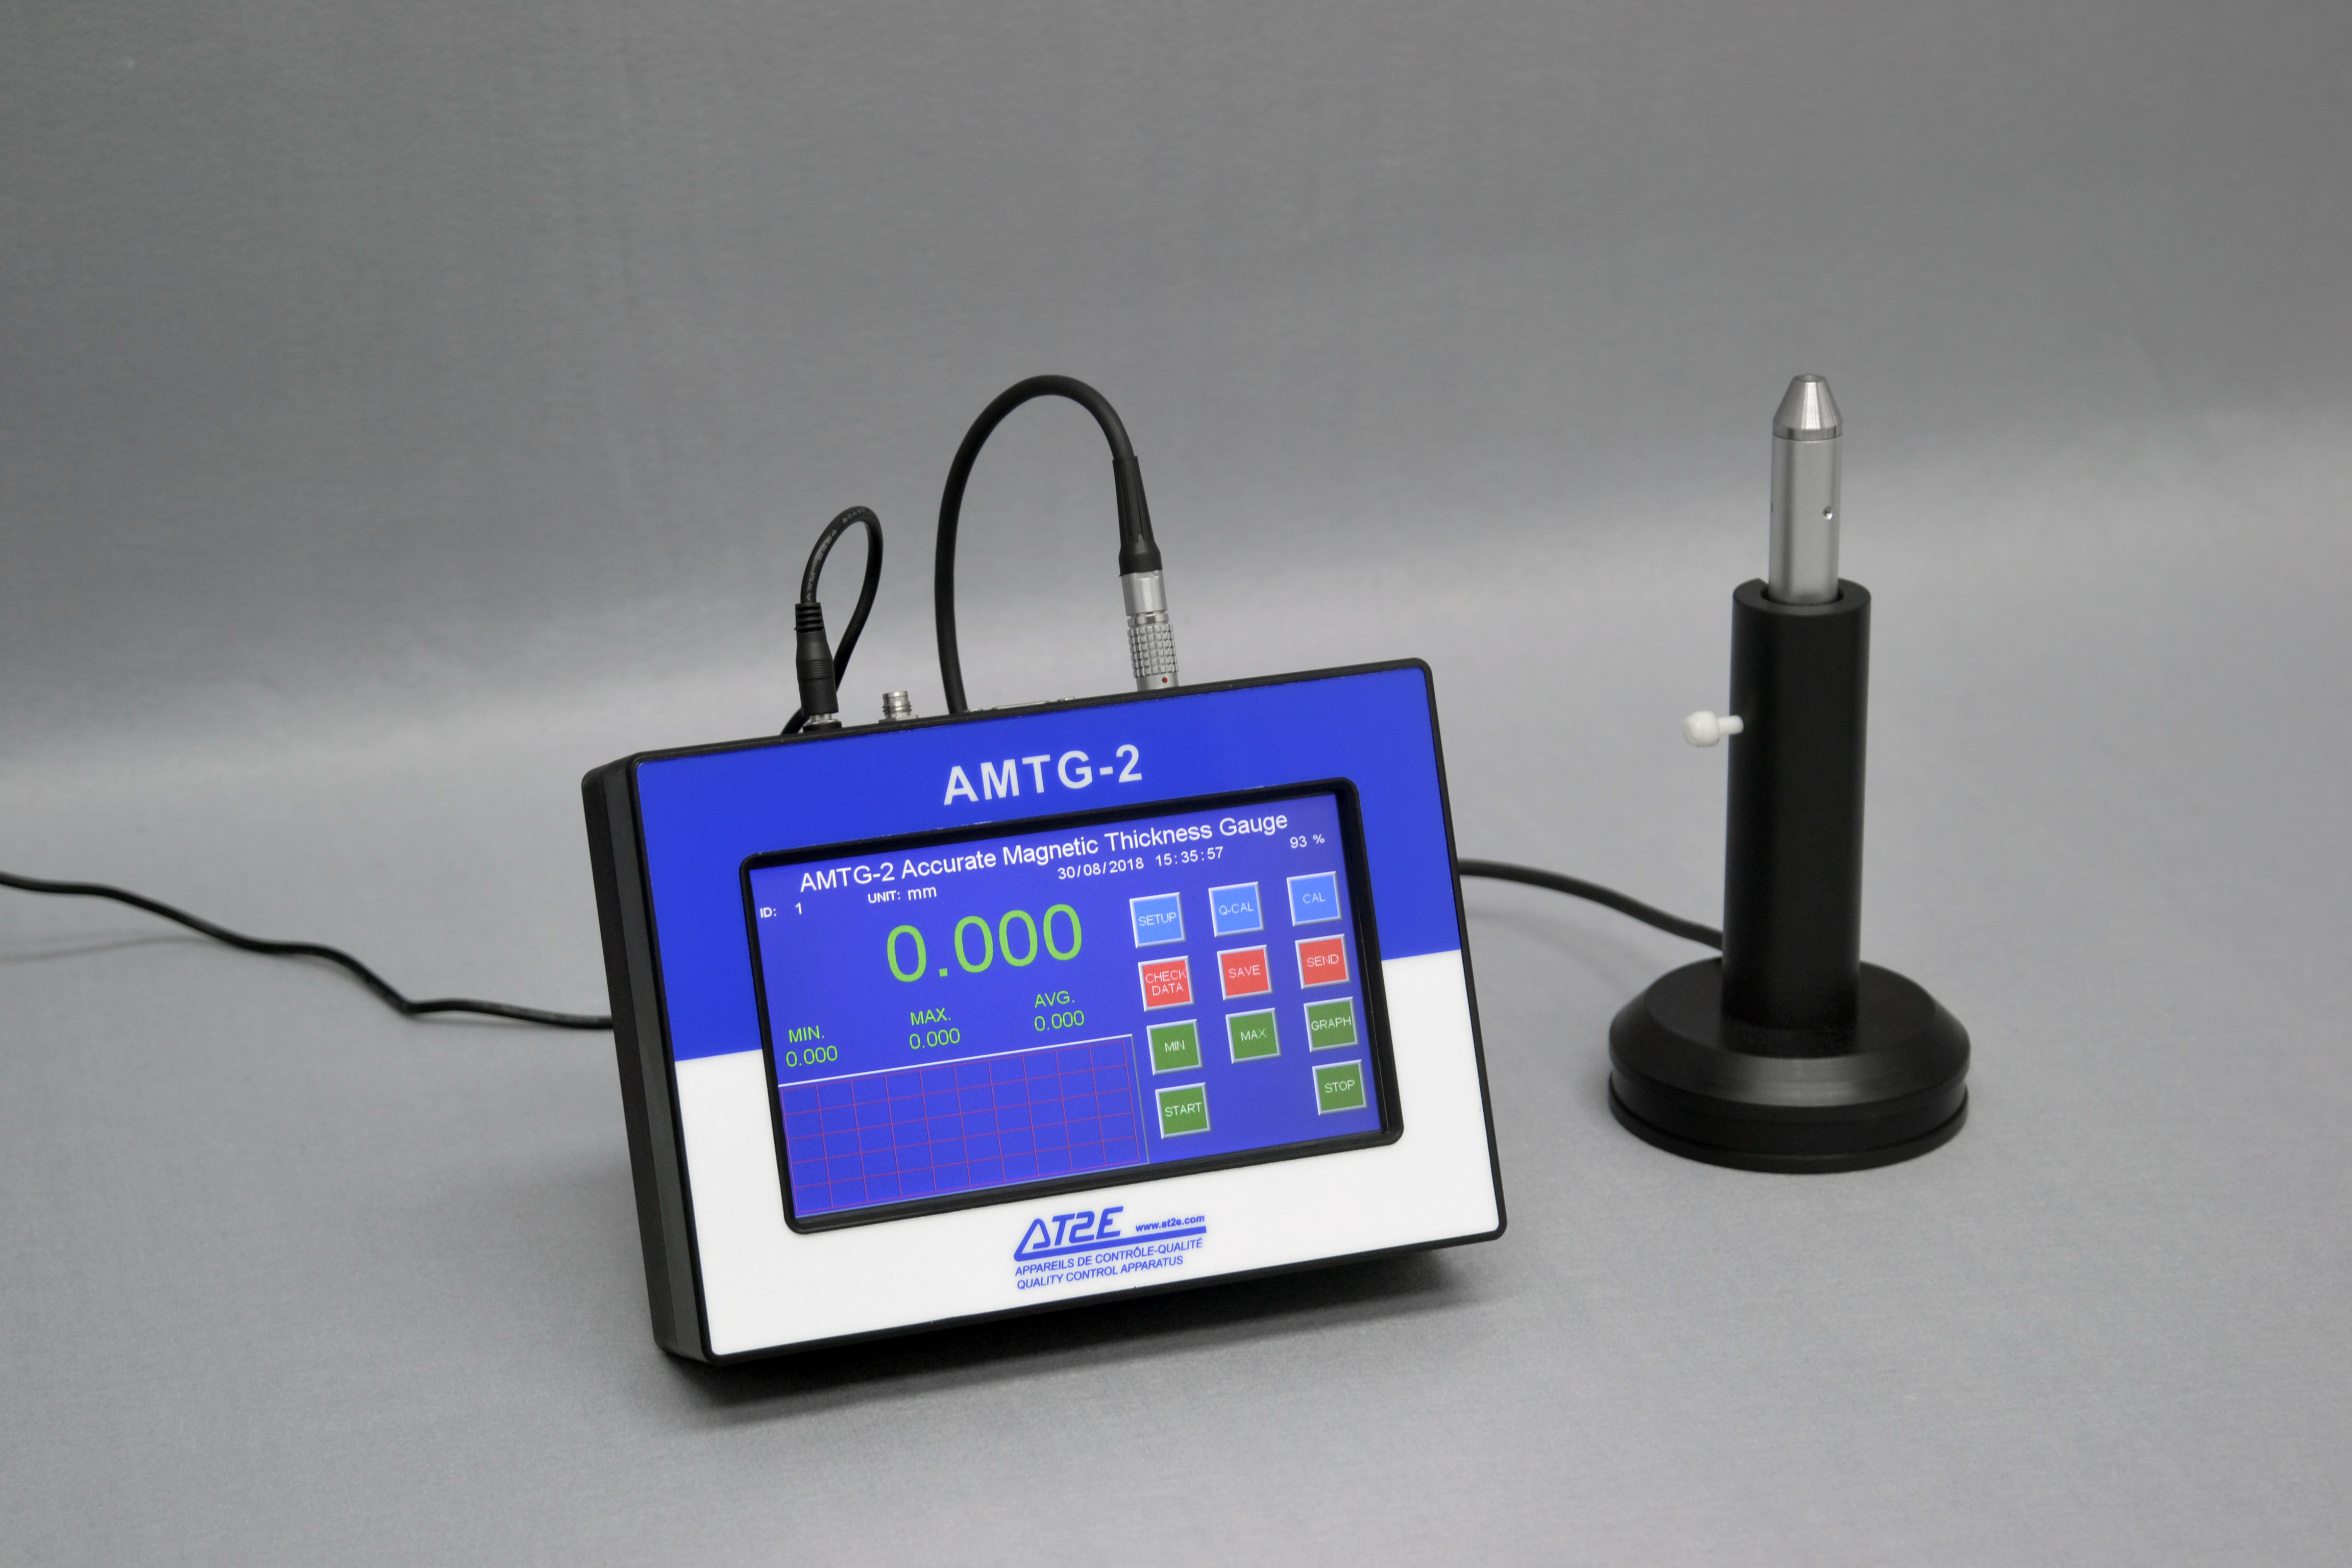 AMTG-2, Accurate Magnetic Thickness Gauge